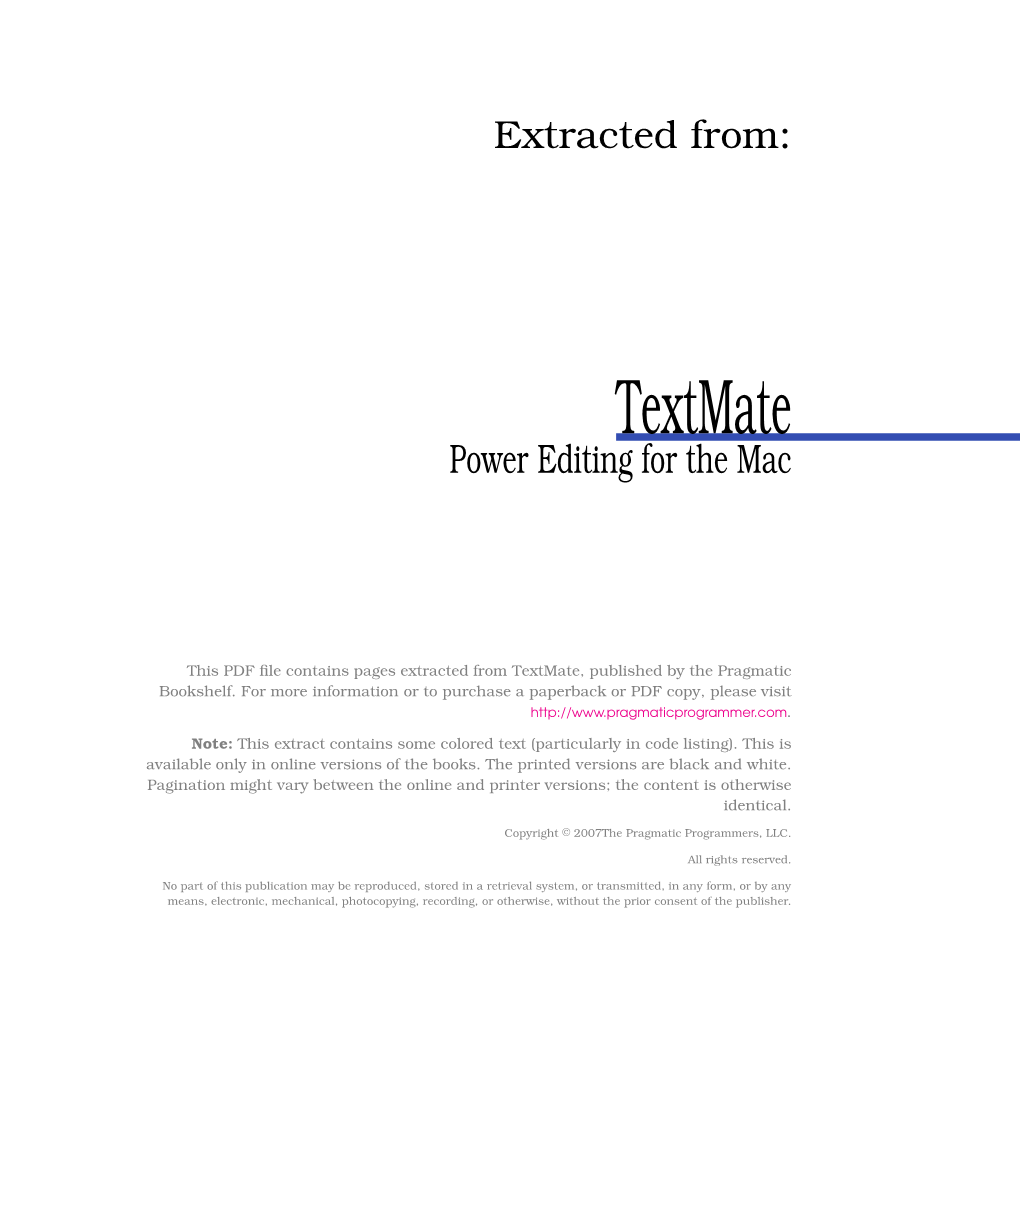 Textmate Power Editing for the Mac